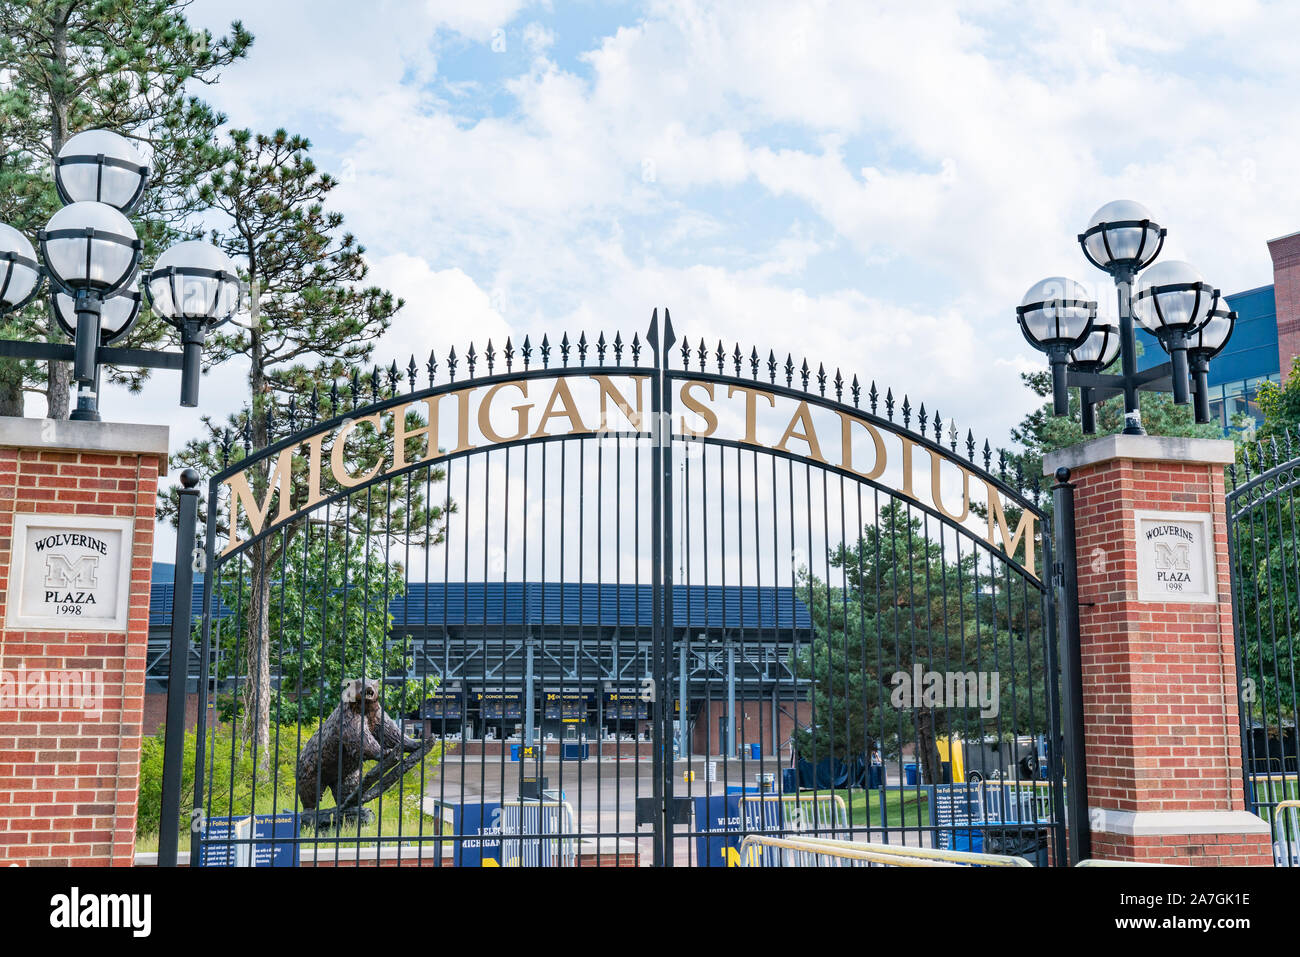 Ann Arbor, MI - September 21, 2019: Entrance gate at the University of Michigan Stadium, home of the Michigan Wolverines Stock Photo